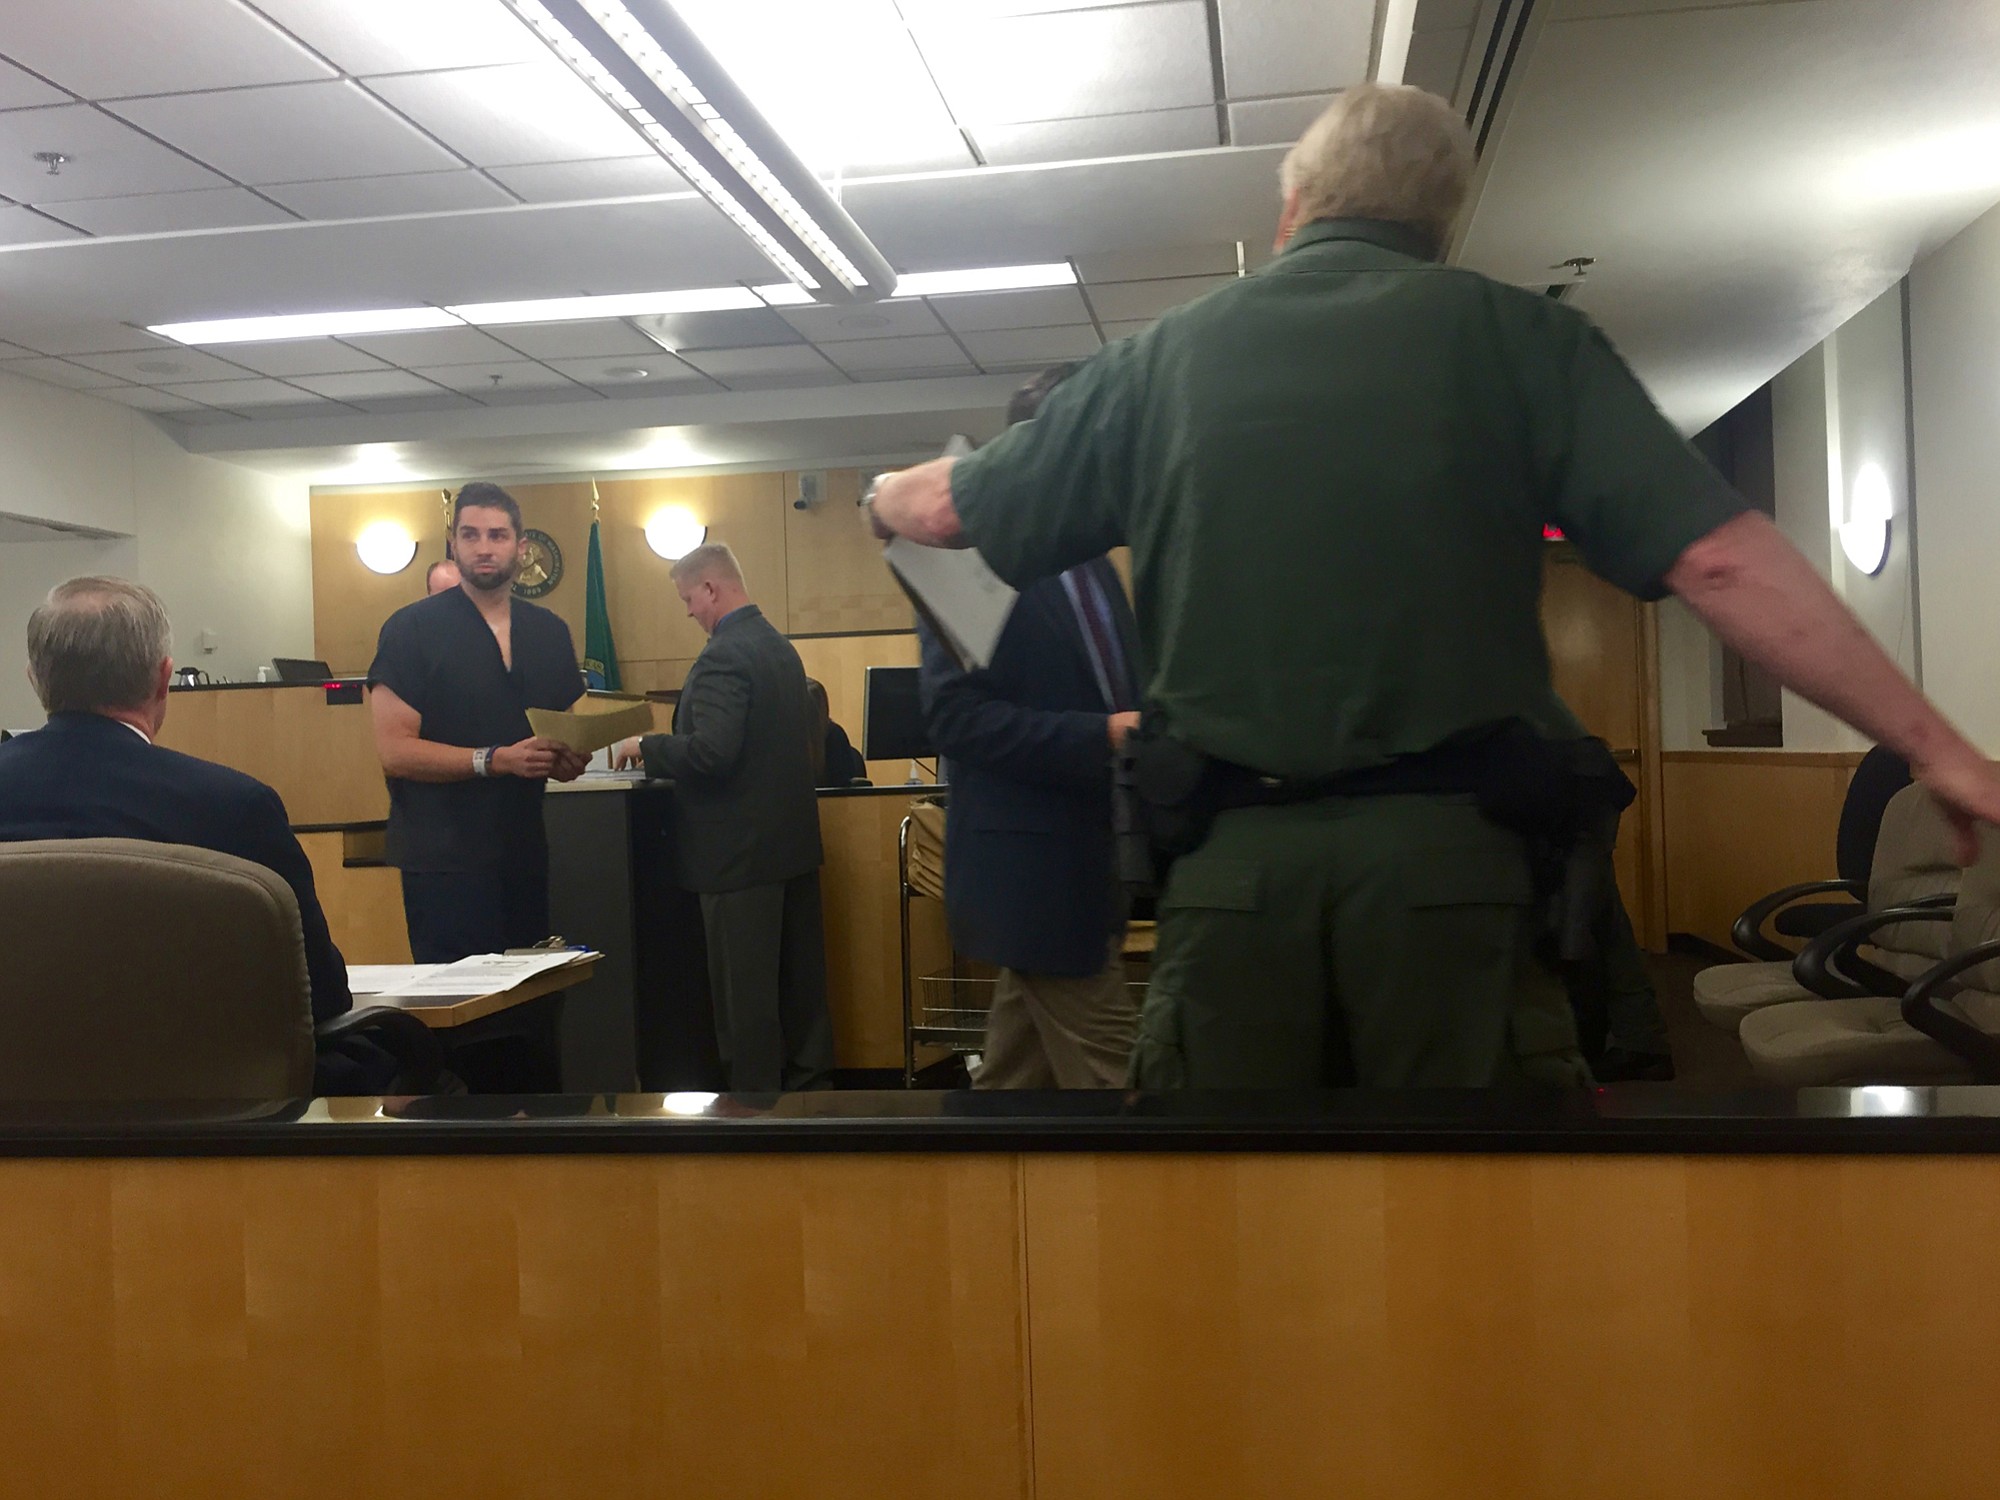 Justin Robert Kolke, 27, makes a first appearance Friday in Clark County Superior Court on suspicion of vehicular assault and felony hit-and-run, both domestic violence-related charges.